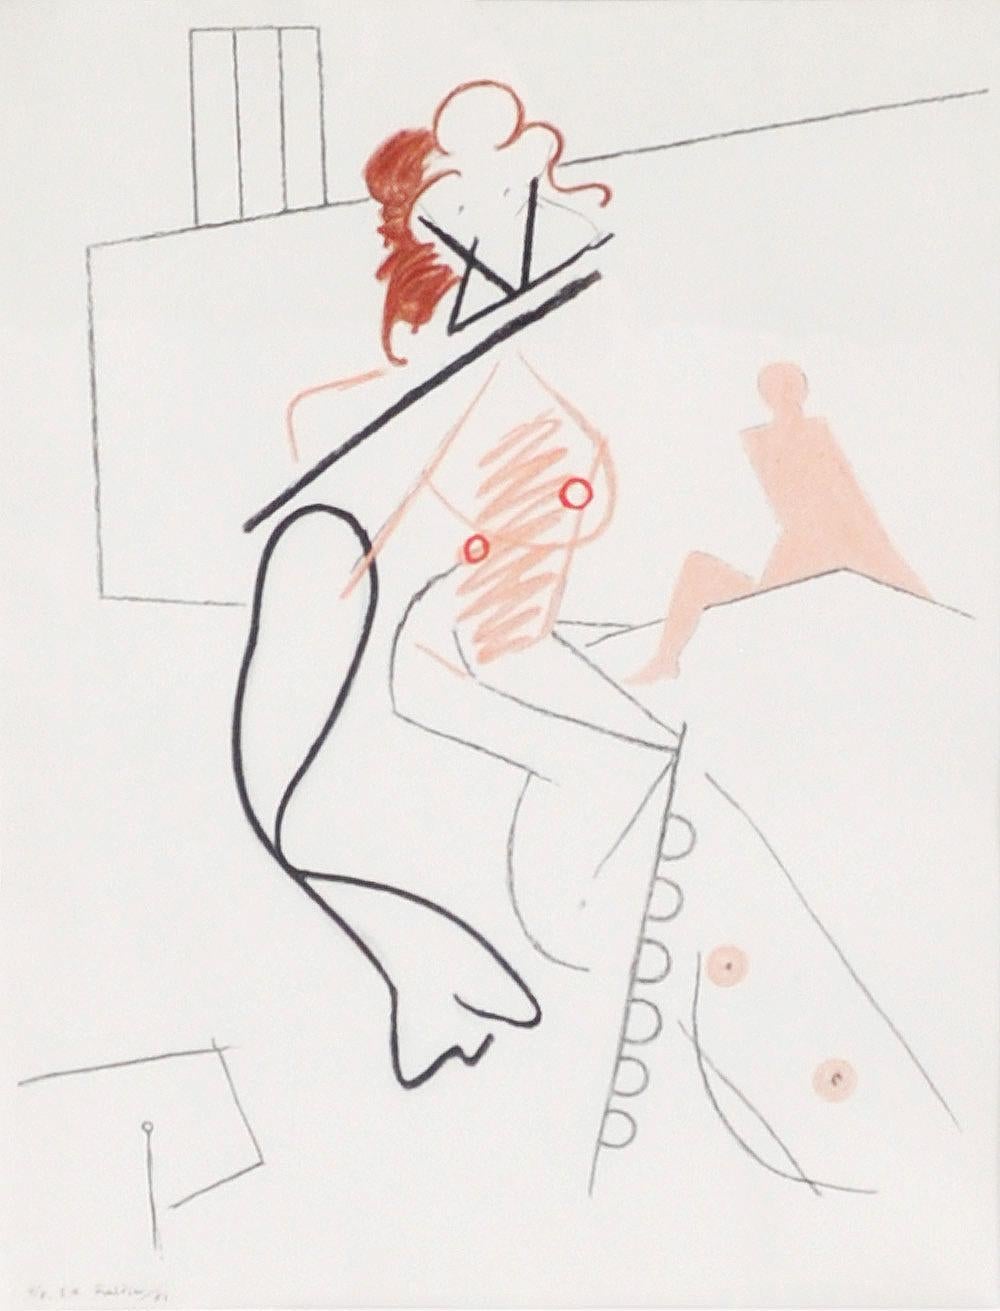 Wilhelm Freddie (1909-95), Lithograph, Komposition med to figurer, 1987
Signed and numbered EA 4/8. 
67 cm H x 51 cm W

Wilhelm Freddie was a Danish painter, graphic artist, object artist and professor at the Royal Danish Academy of Fine Arts in